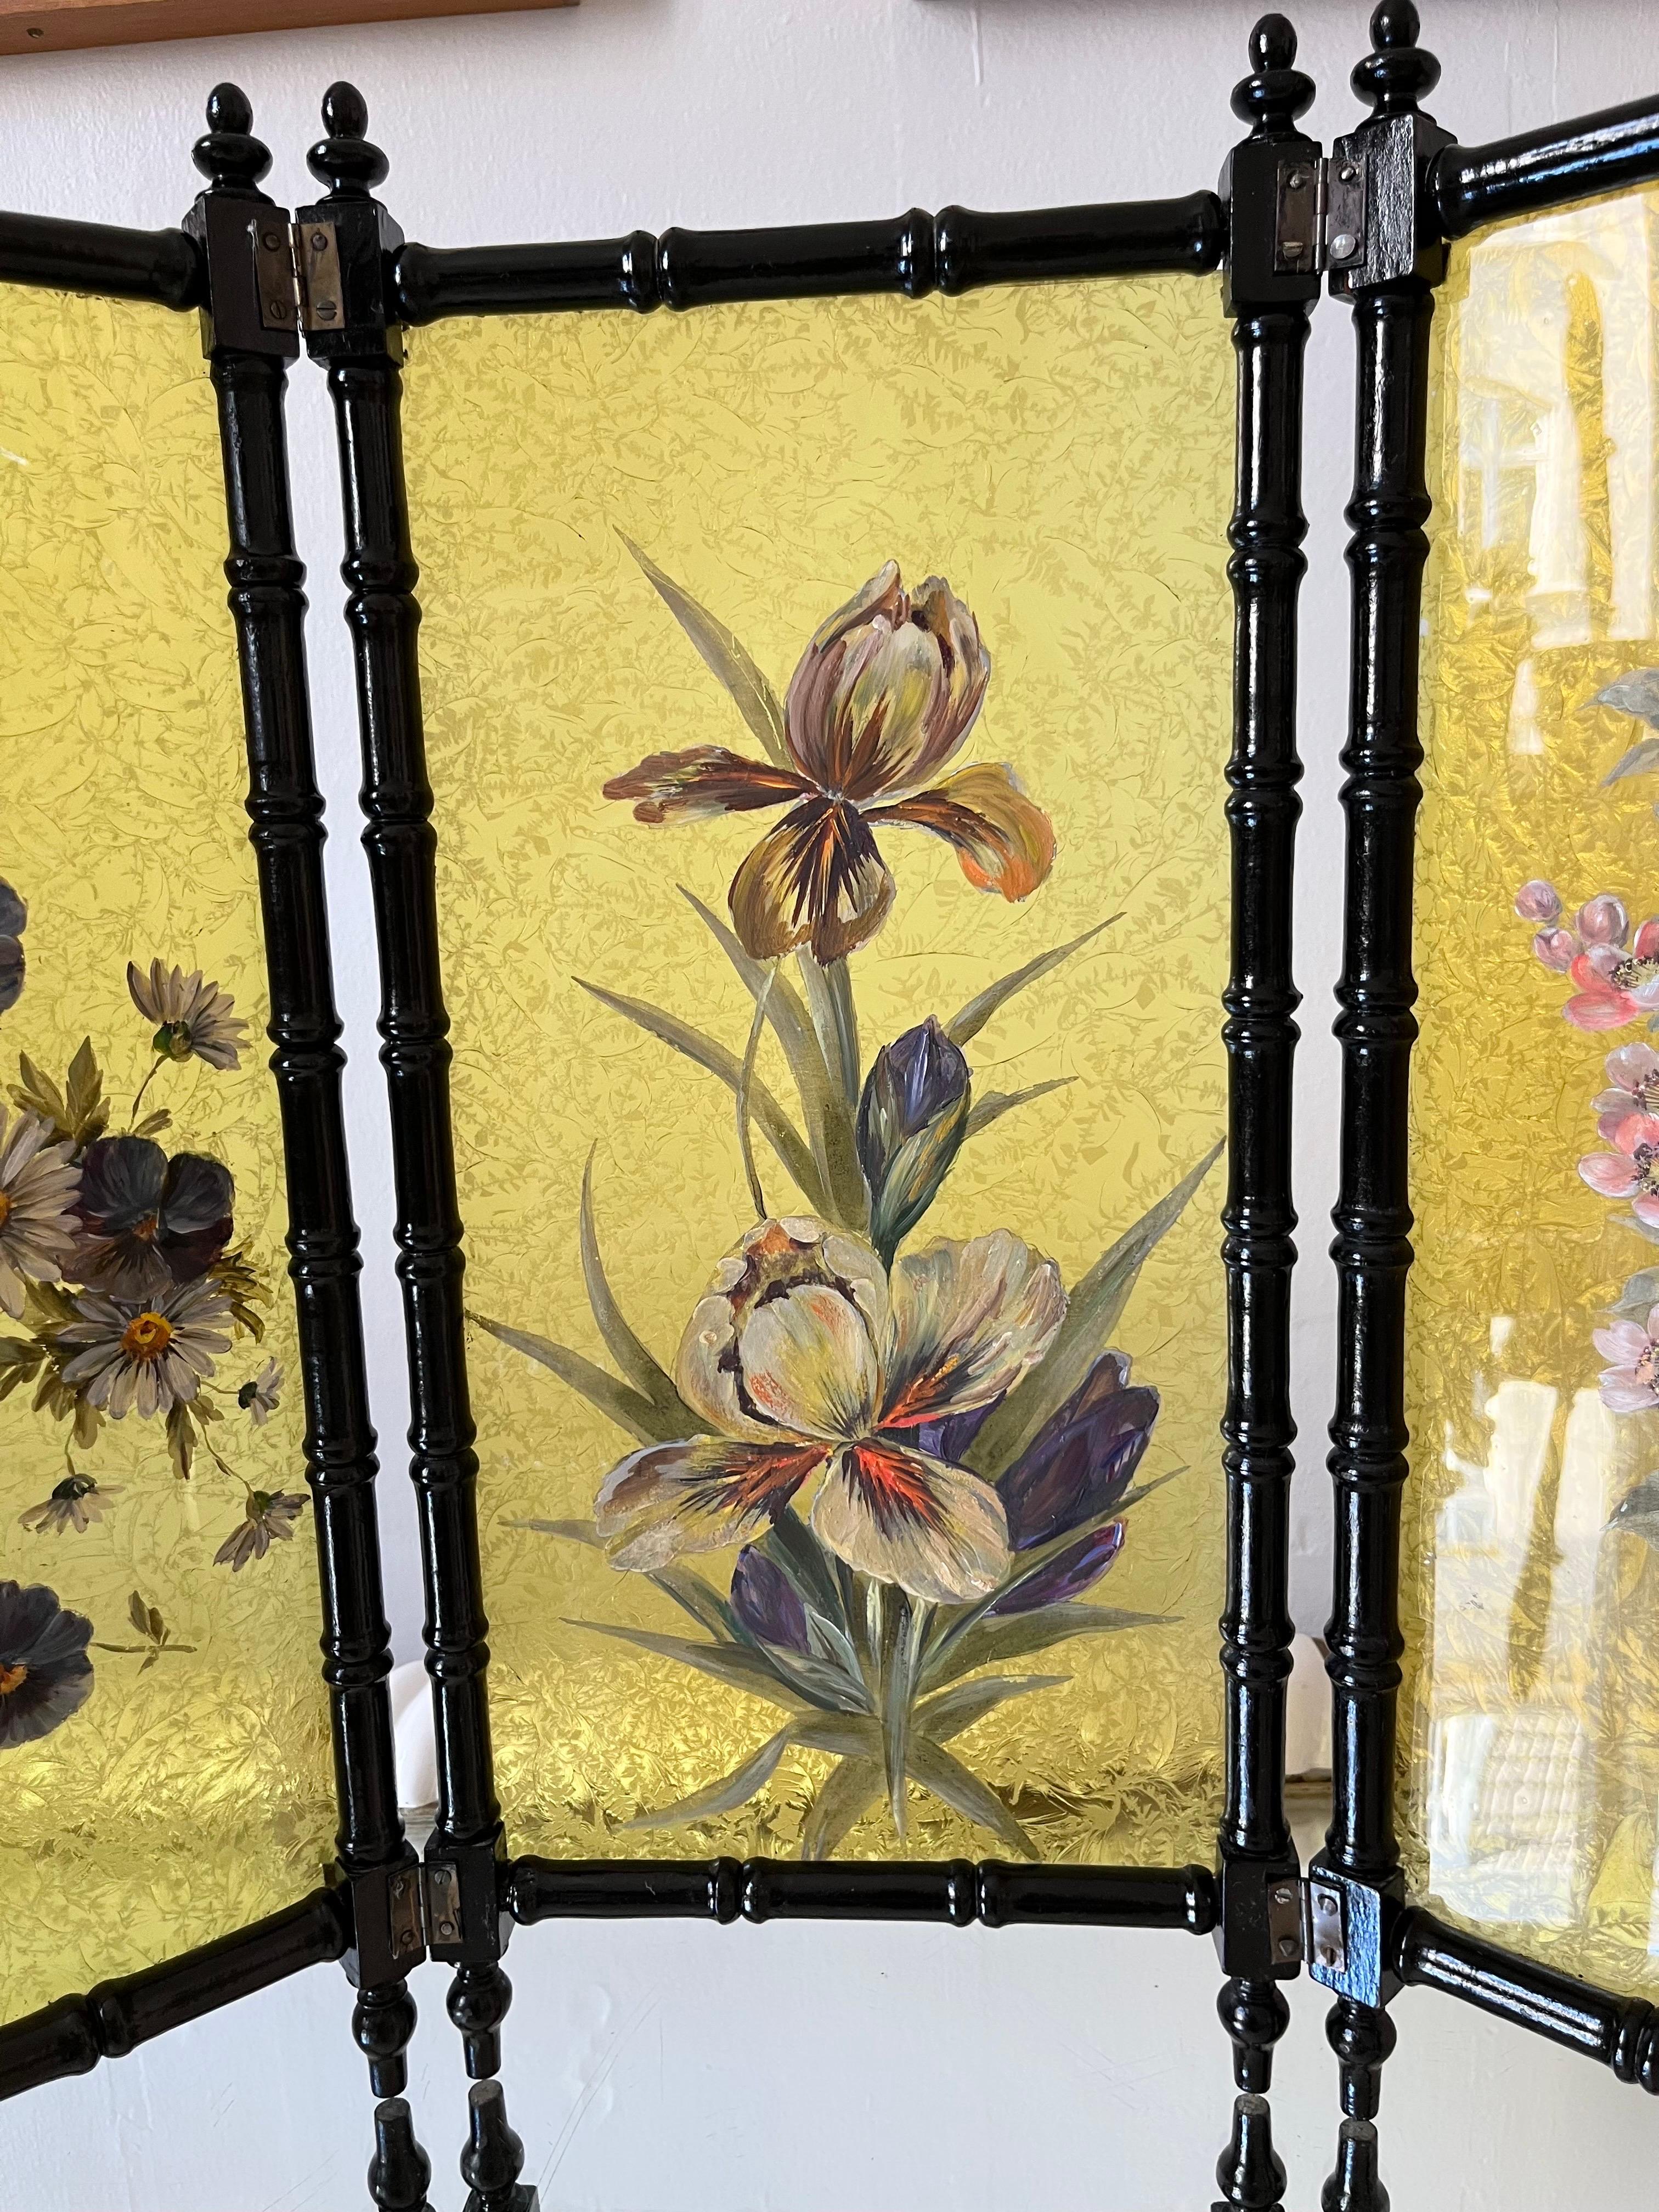 Antique Swedish Hand-Painted Decorative Three-Panel Glass Screen In Good Condition For Sale In Frederiksberg C, DK